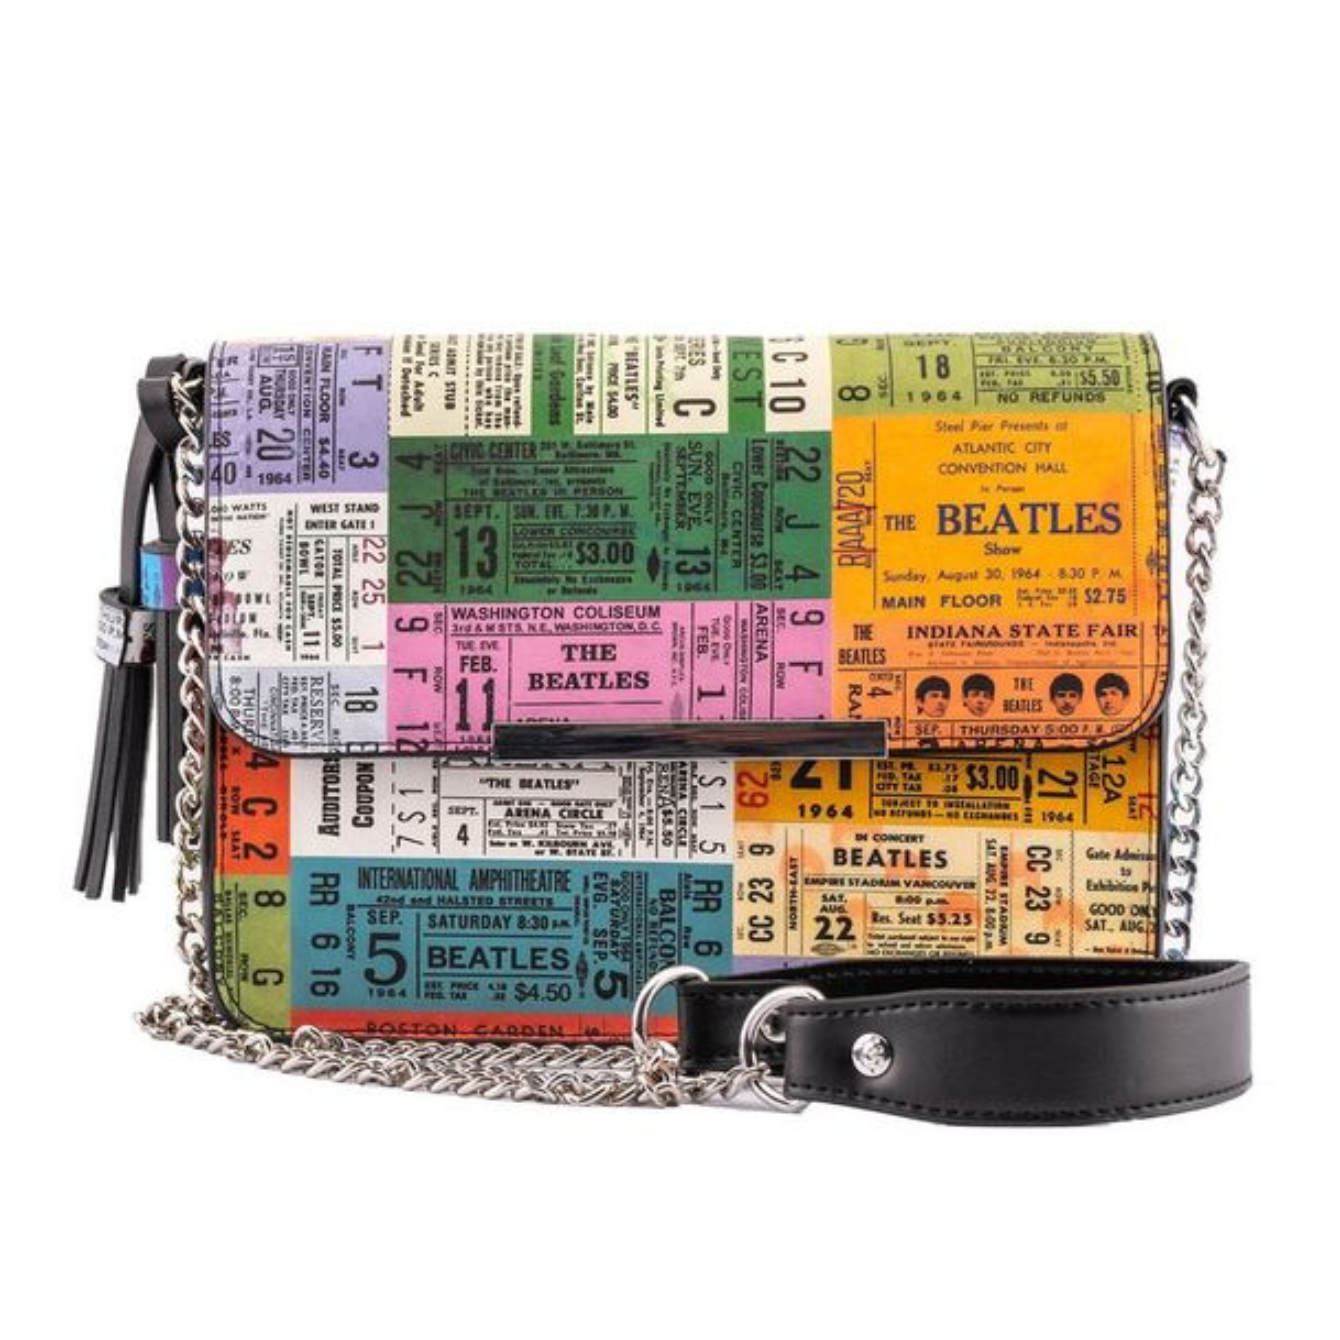 THE BEATLES TICKET STUBS CROSS BODY BAG LOUNGEFLY